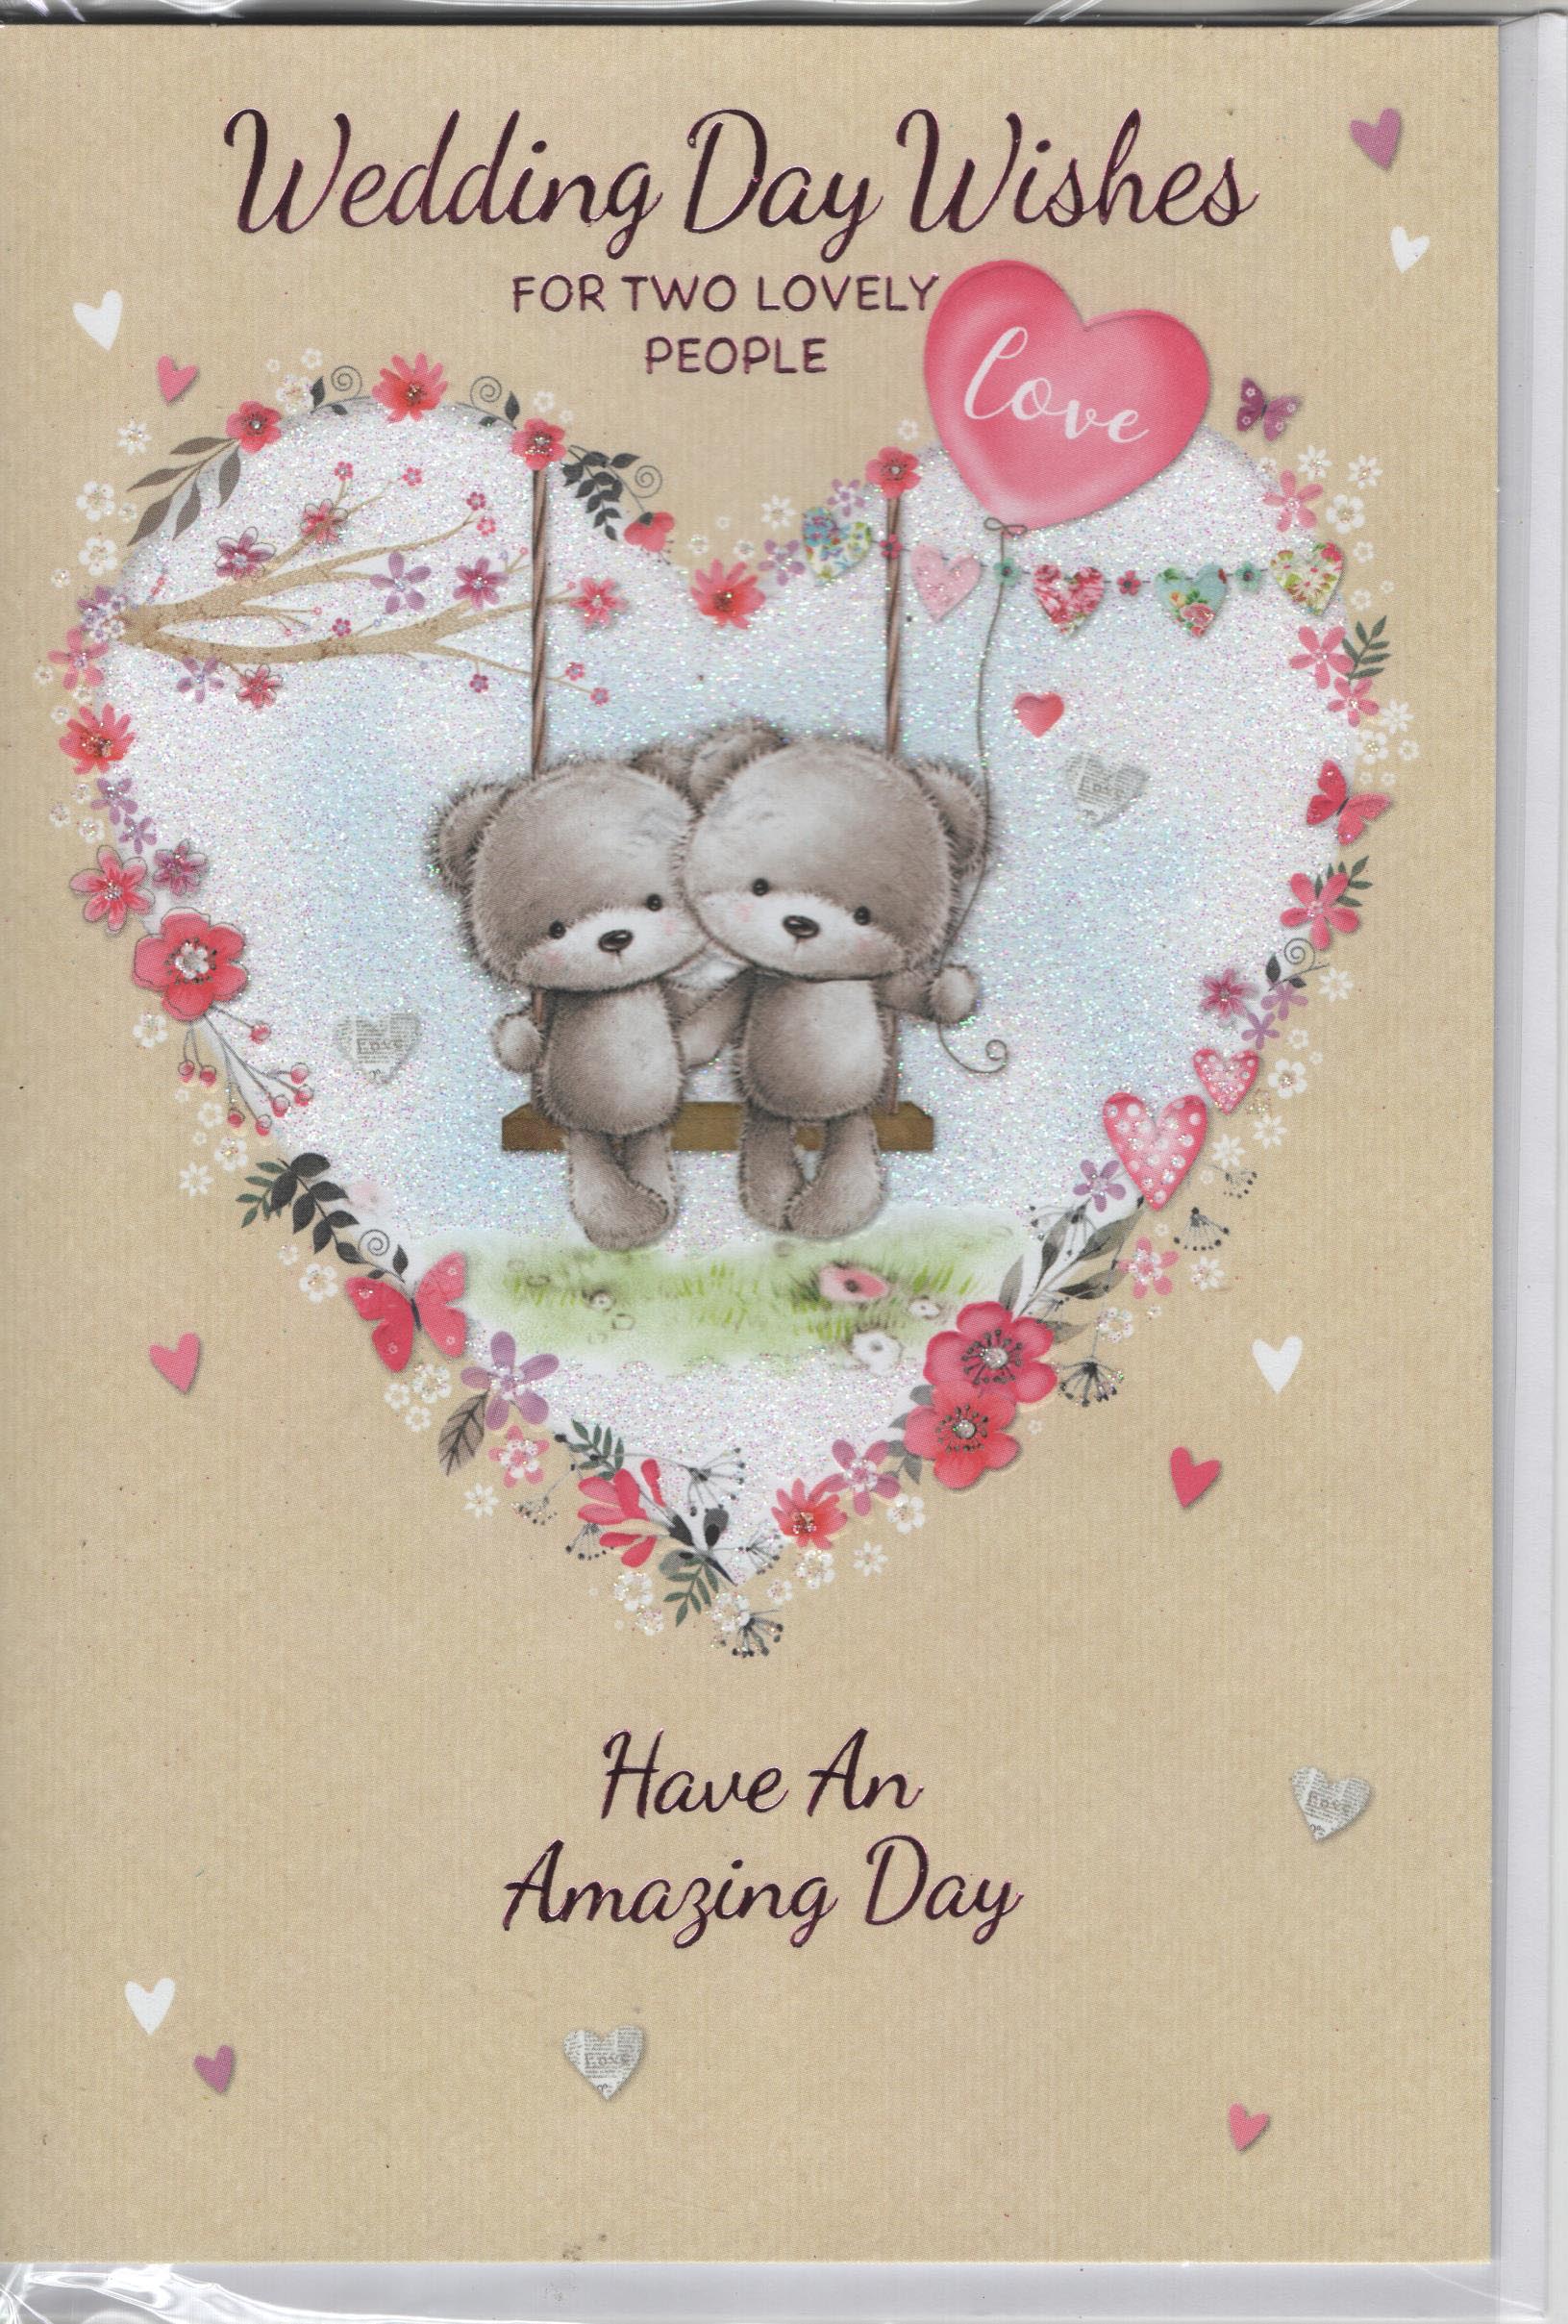 Wedding Day Wishes for two Lovely People Have an Amasing Day